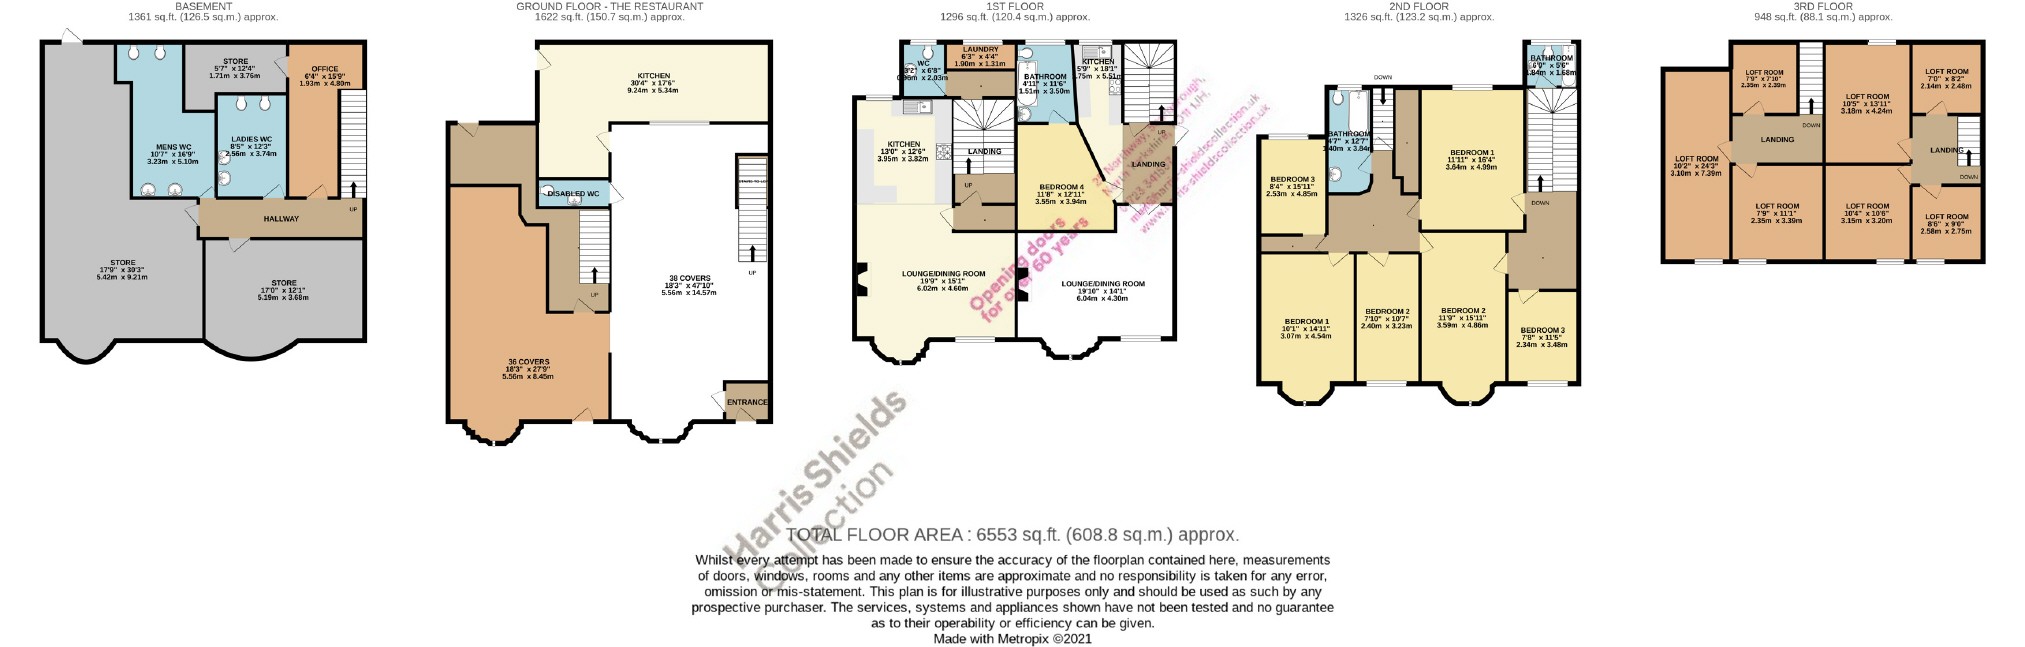  for sale in York Place, Scarborough - Property floorplan